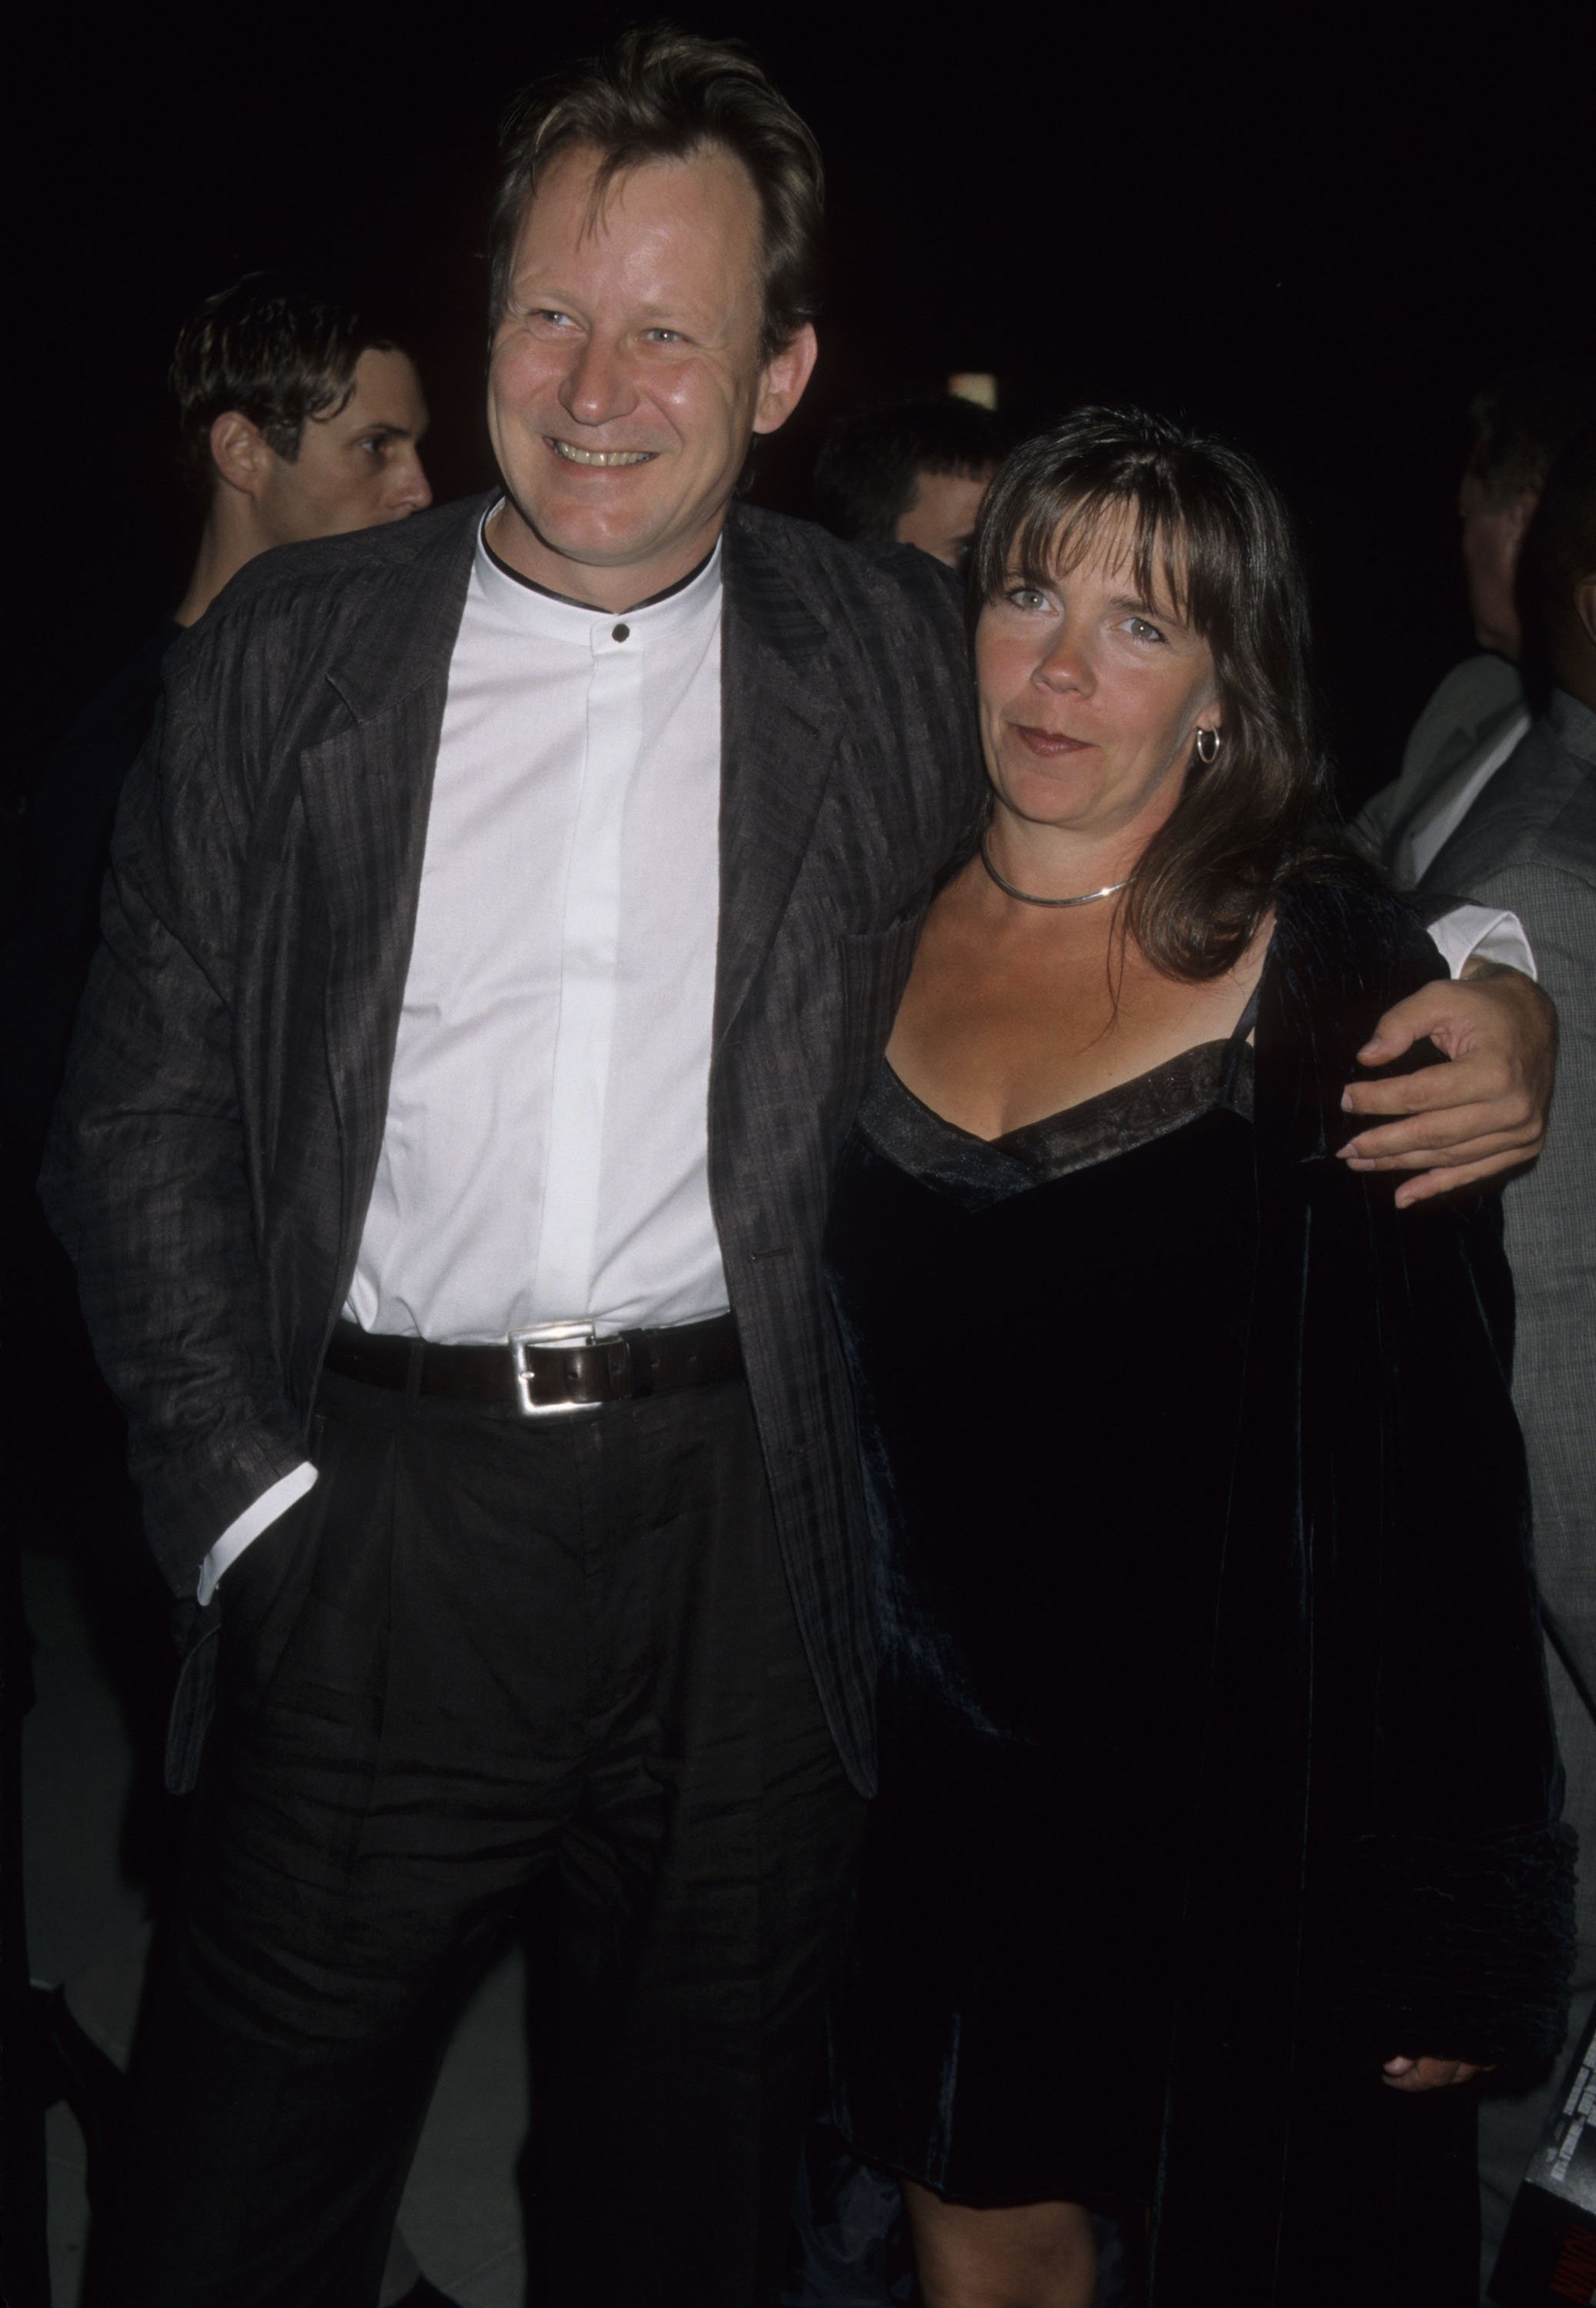 Actor Stellan Skarsgard and wife My Skarsgard attend the premiere of Ronin on September 23, 1998, at the Academy Theater in Beverly Hills, California. | Source: Getty Images